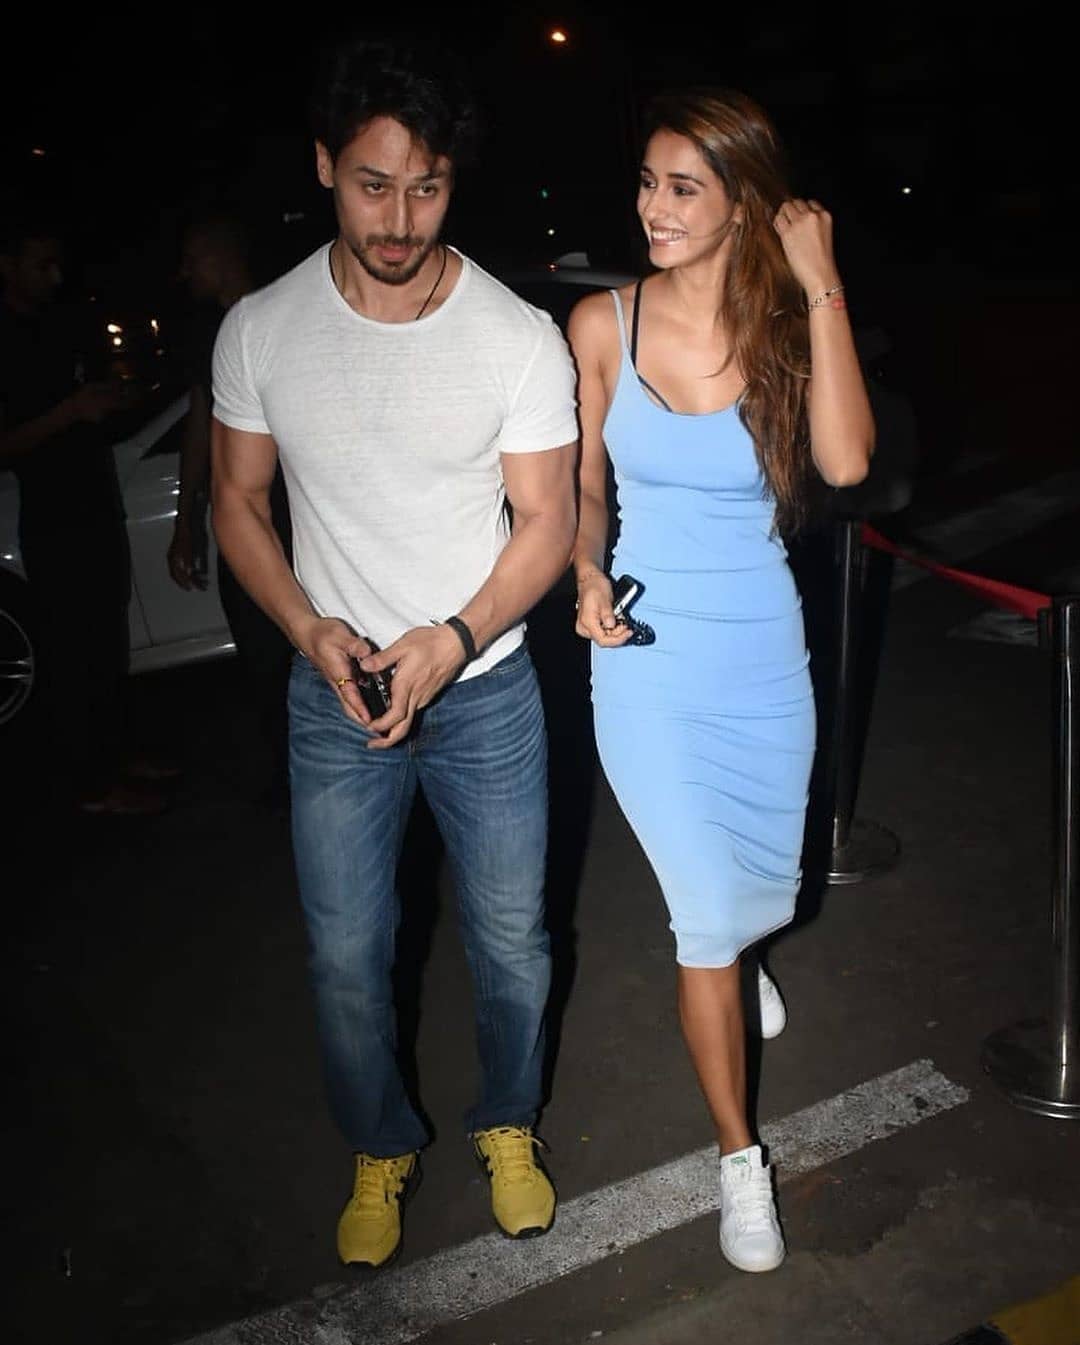 Disha patani Hot In A Tight Sleeveless Frock With Her Boy Friend Tiger Shroff